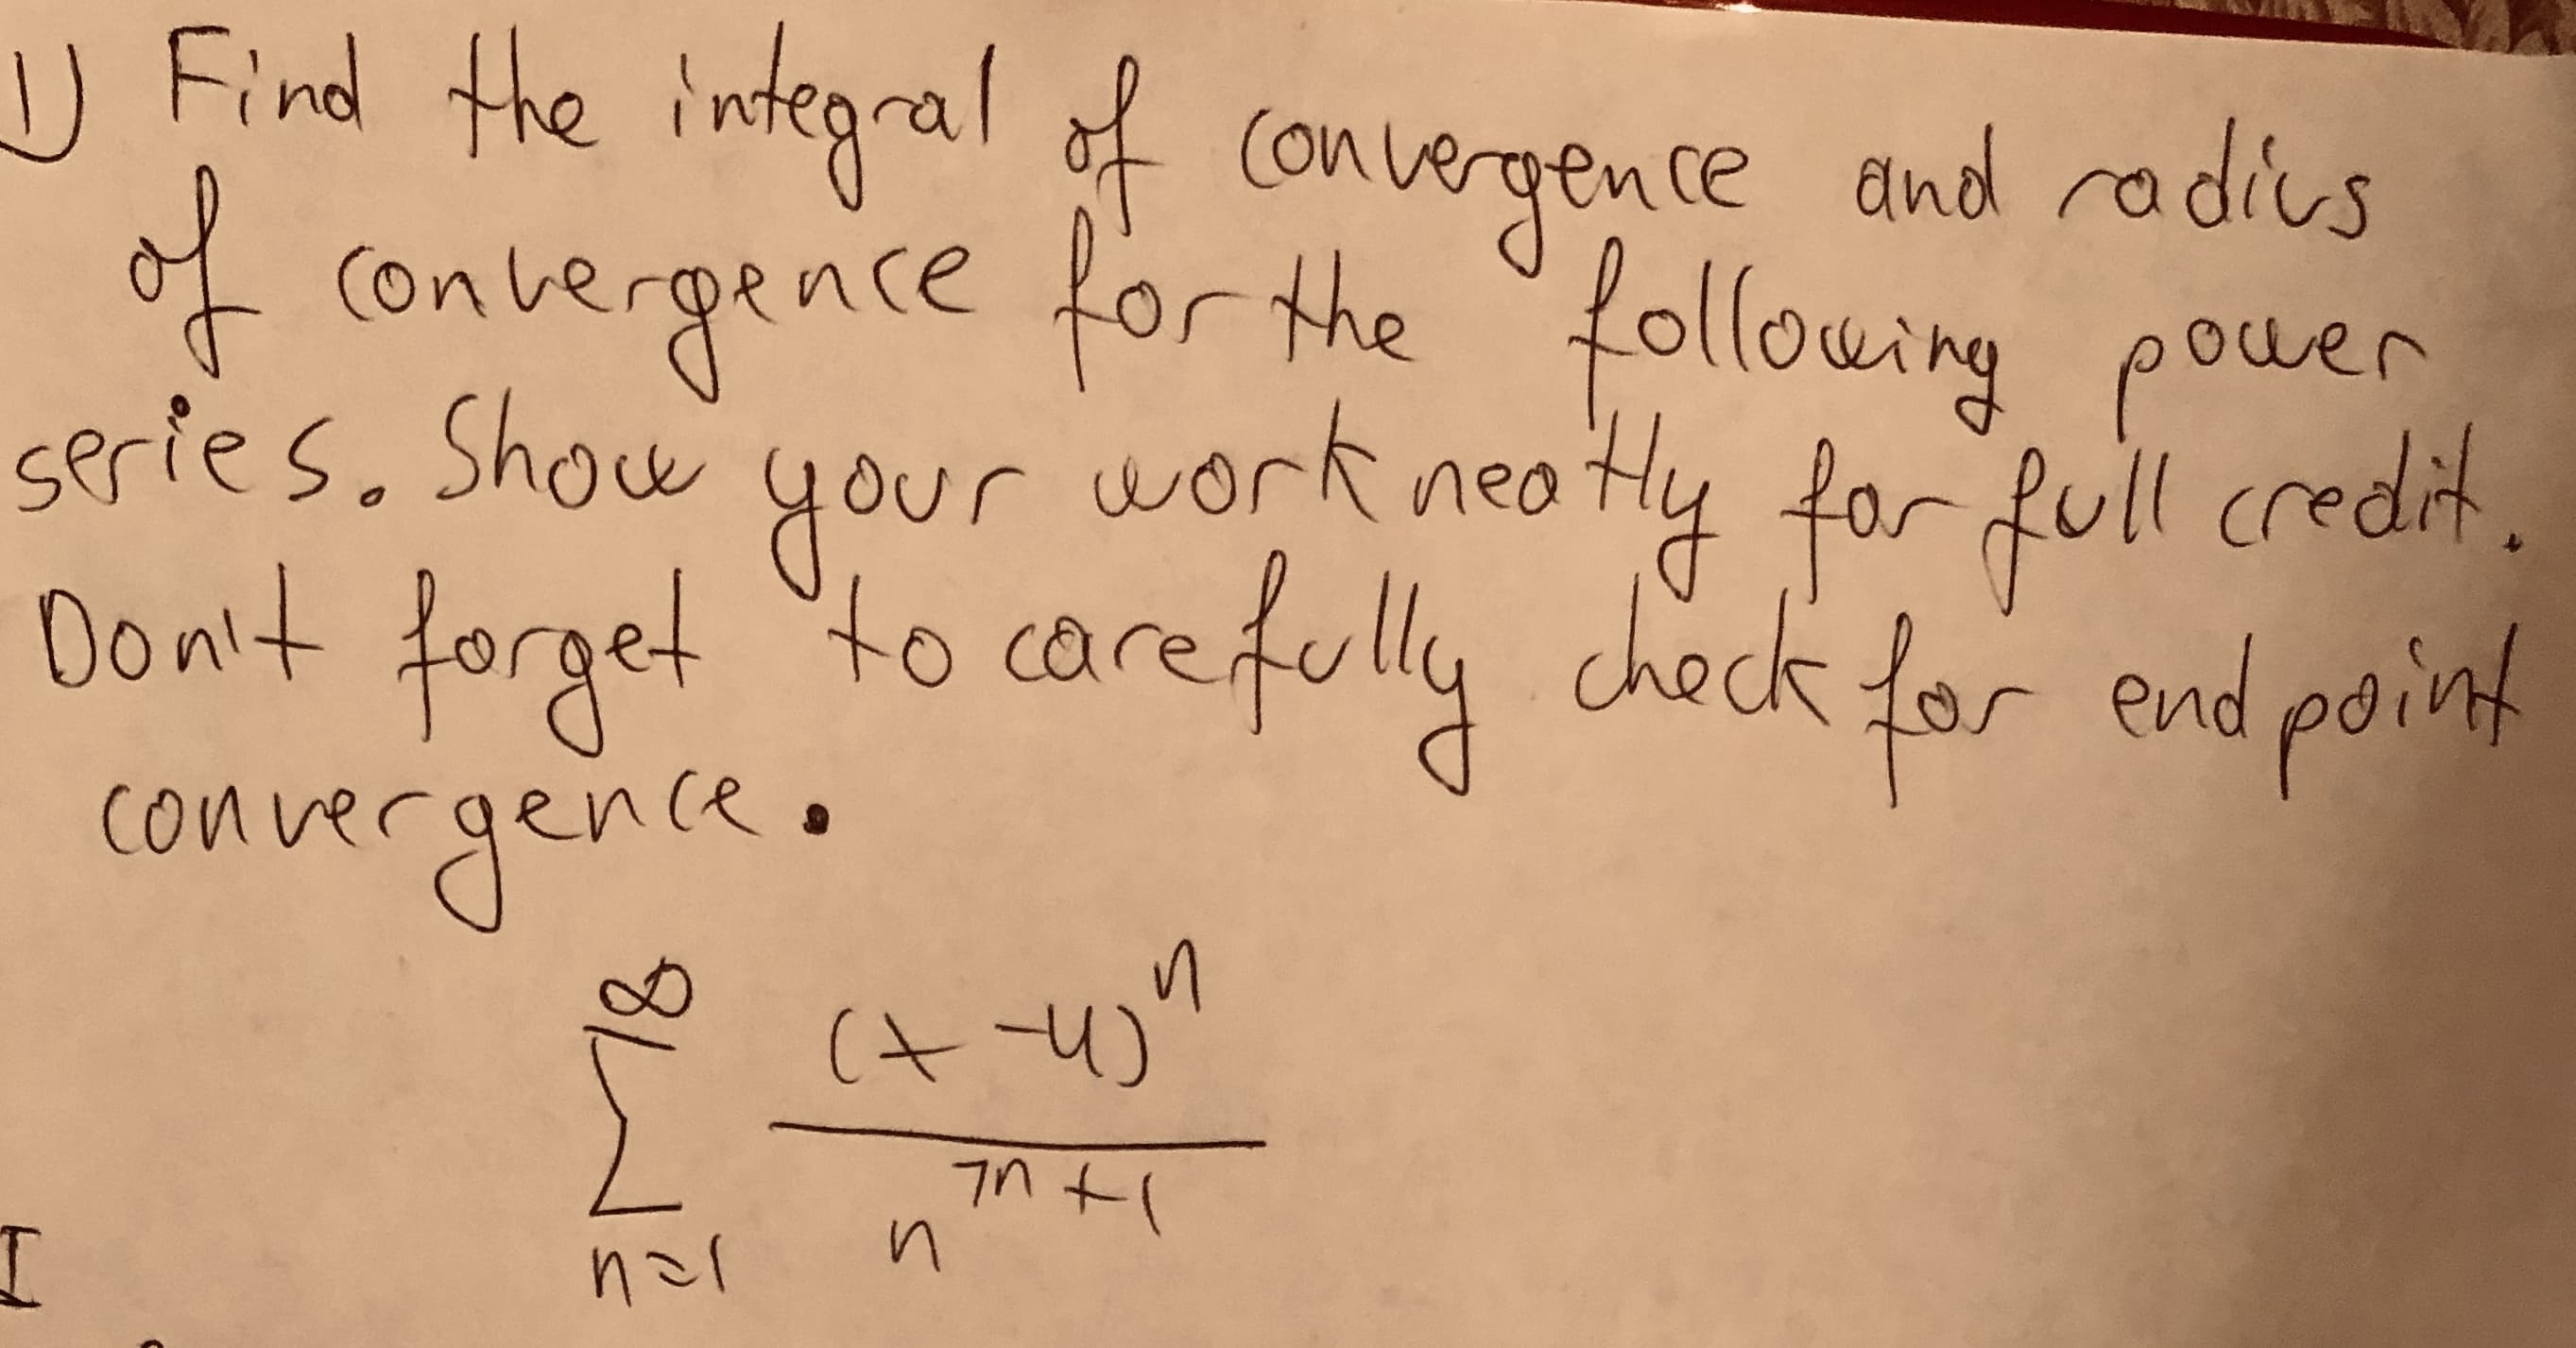 Find the integral of
Convergence and radius
convergence for the "following pouen
ies. Show
your
'r
work neatly for full credit.
in't forget to corefully check for end point
nit
onvergence.
